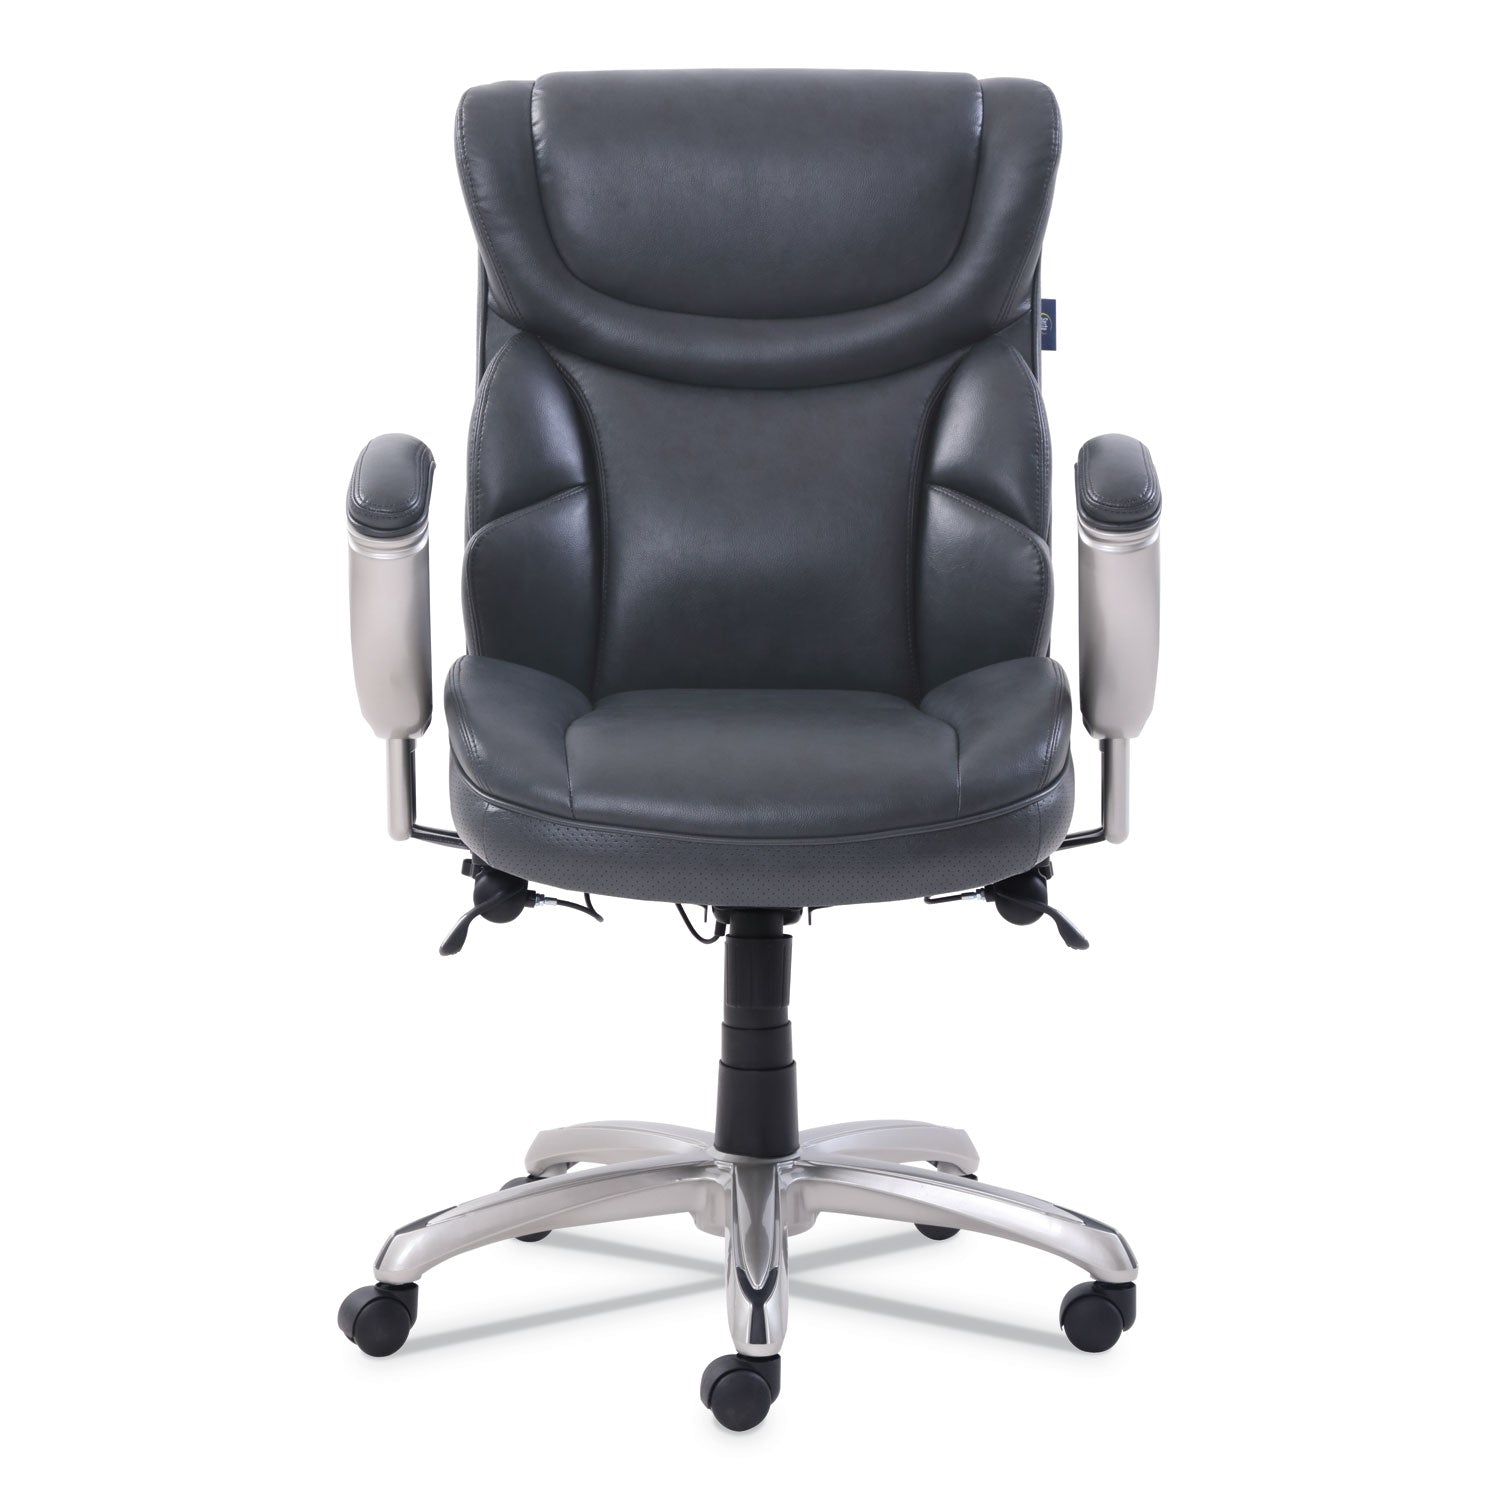 emerson-task-chair-supports-up-to-300-lb-1875-to-2175-seat-height-gray-seat-back-silver-base_srj49711gry - 2